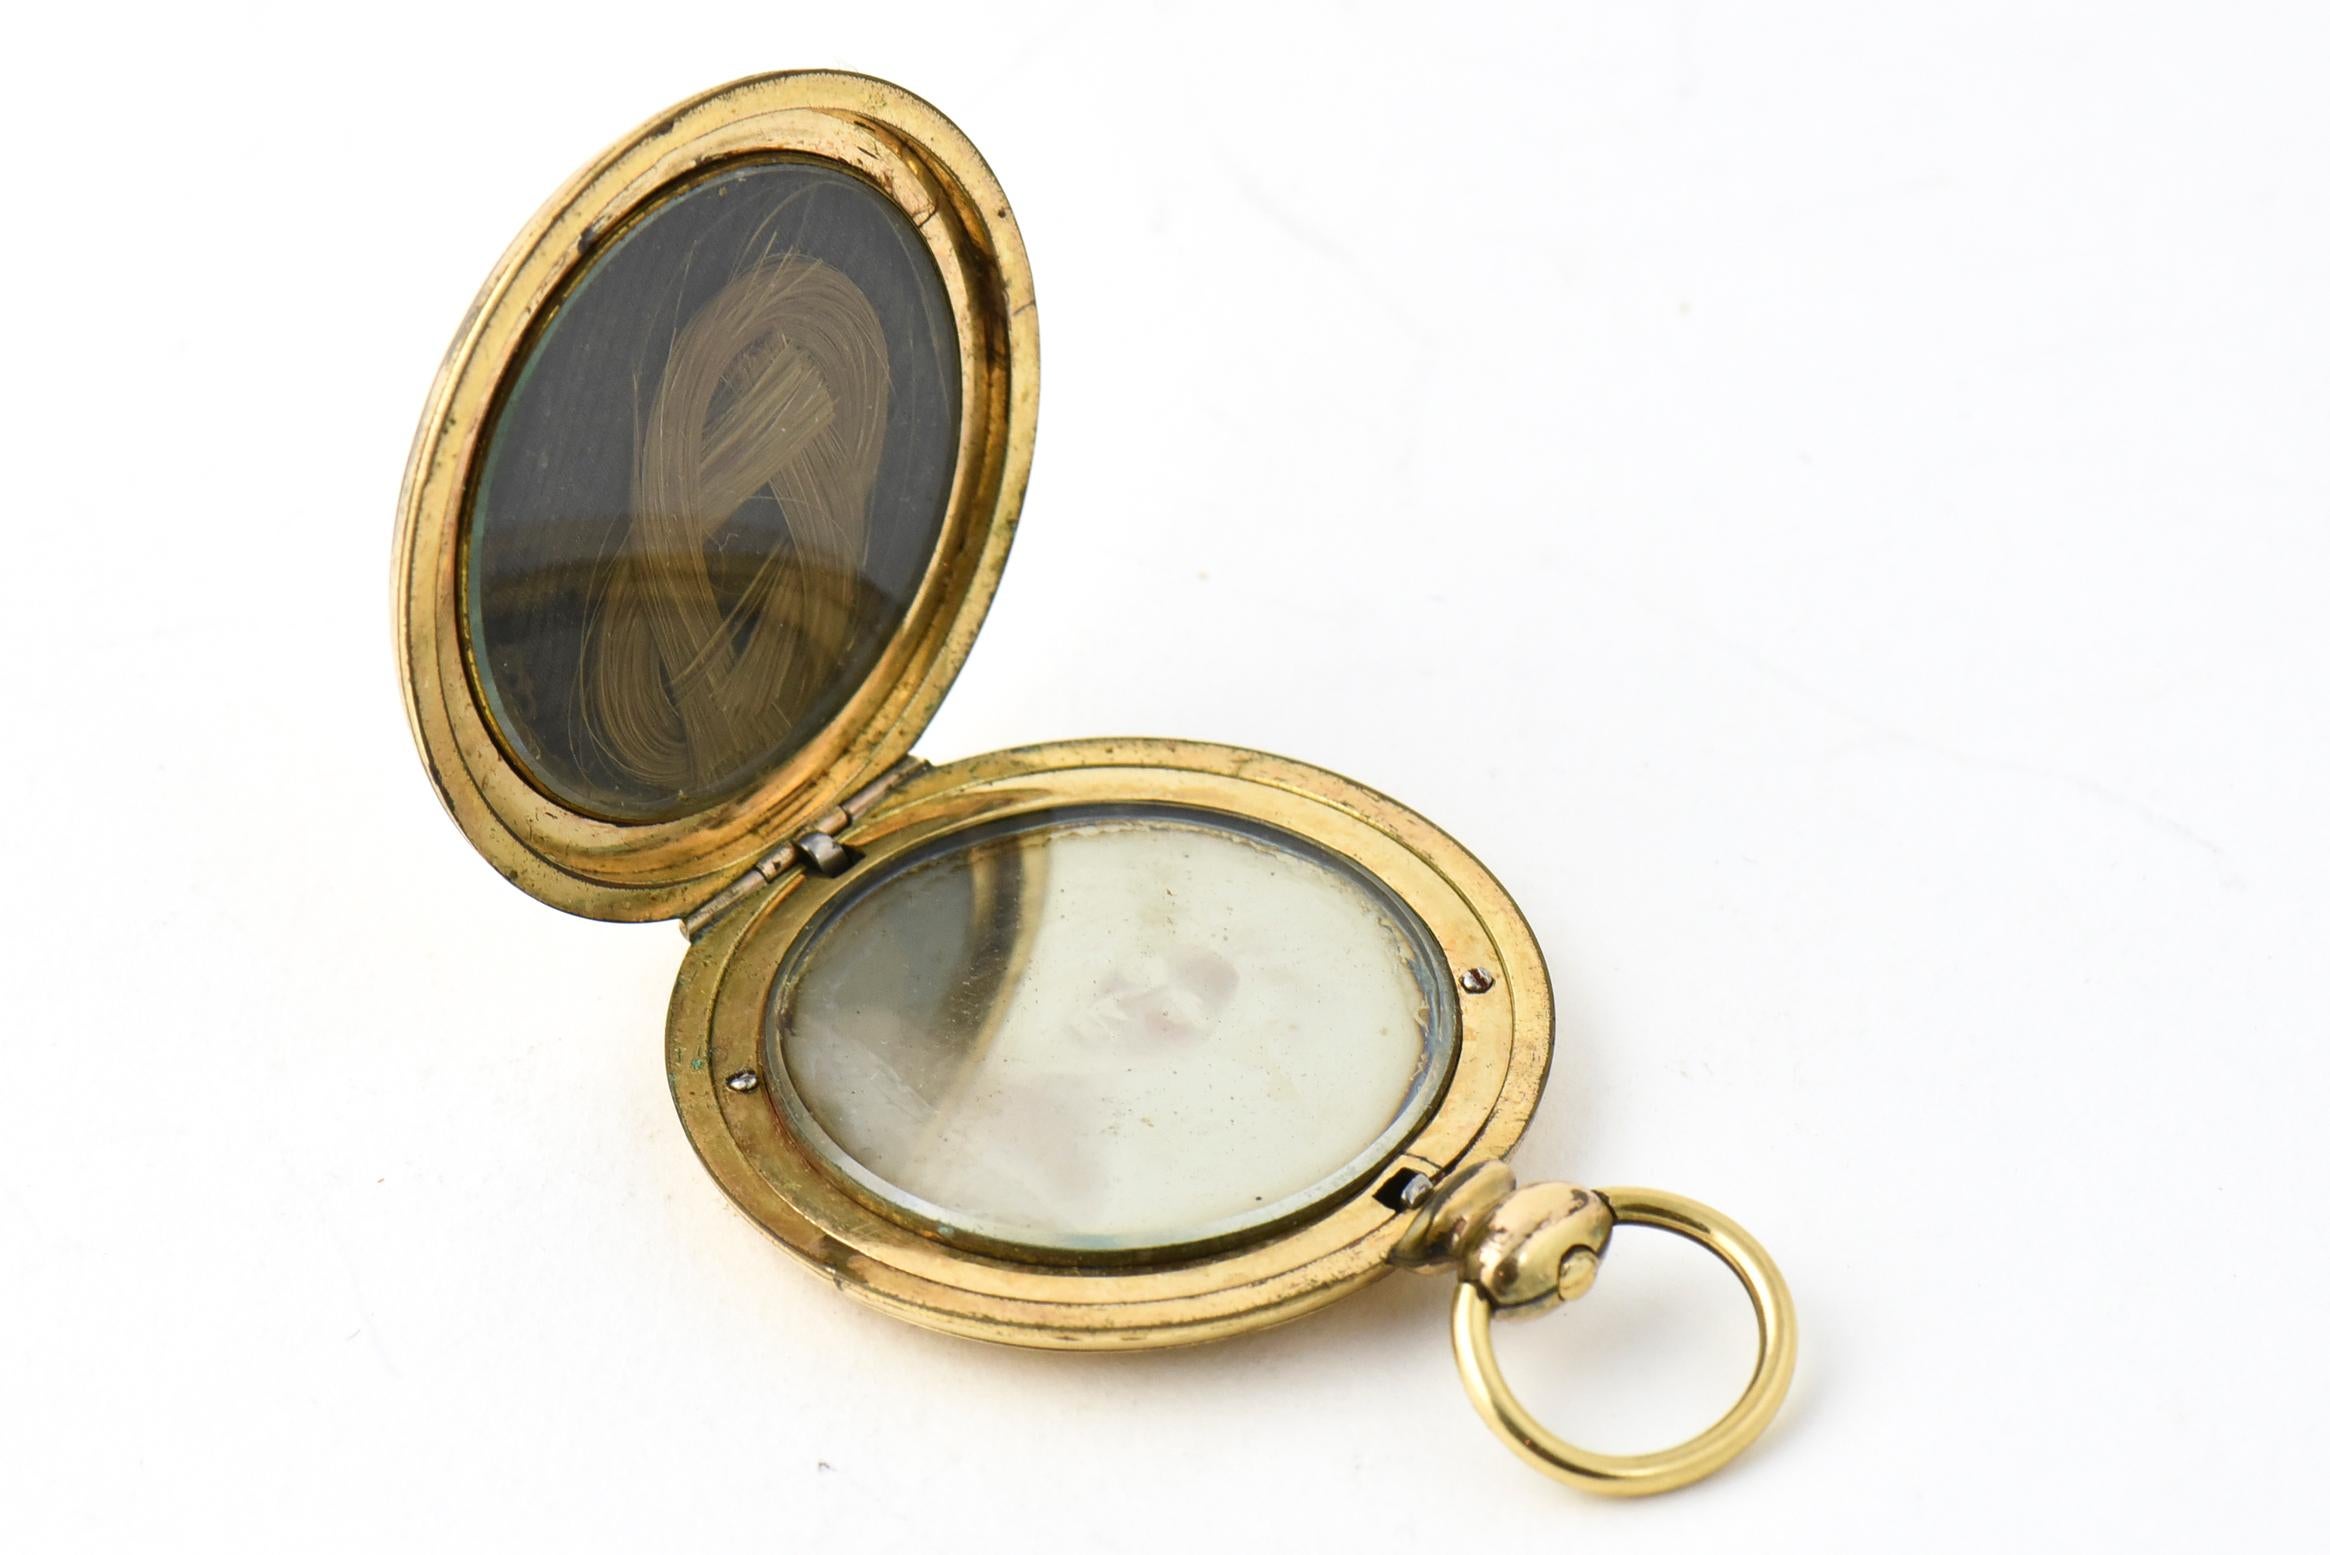 Victorian gold-filled memorial locket featuring a daguerreotype portrait of a woman on one side and a lock of hair on the other, both under glass. The exterior has an engine-turned gold finish with a shield and initials 